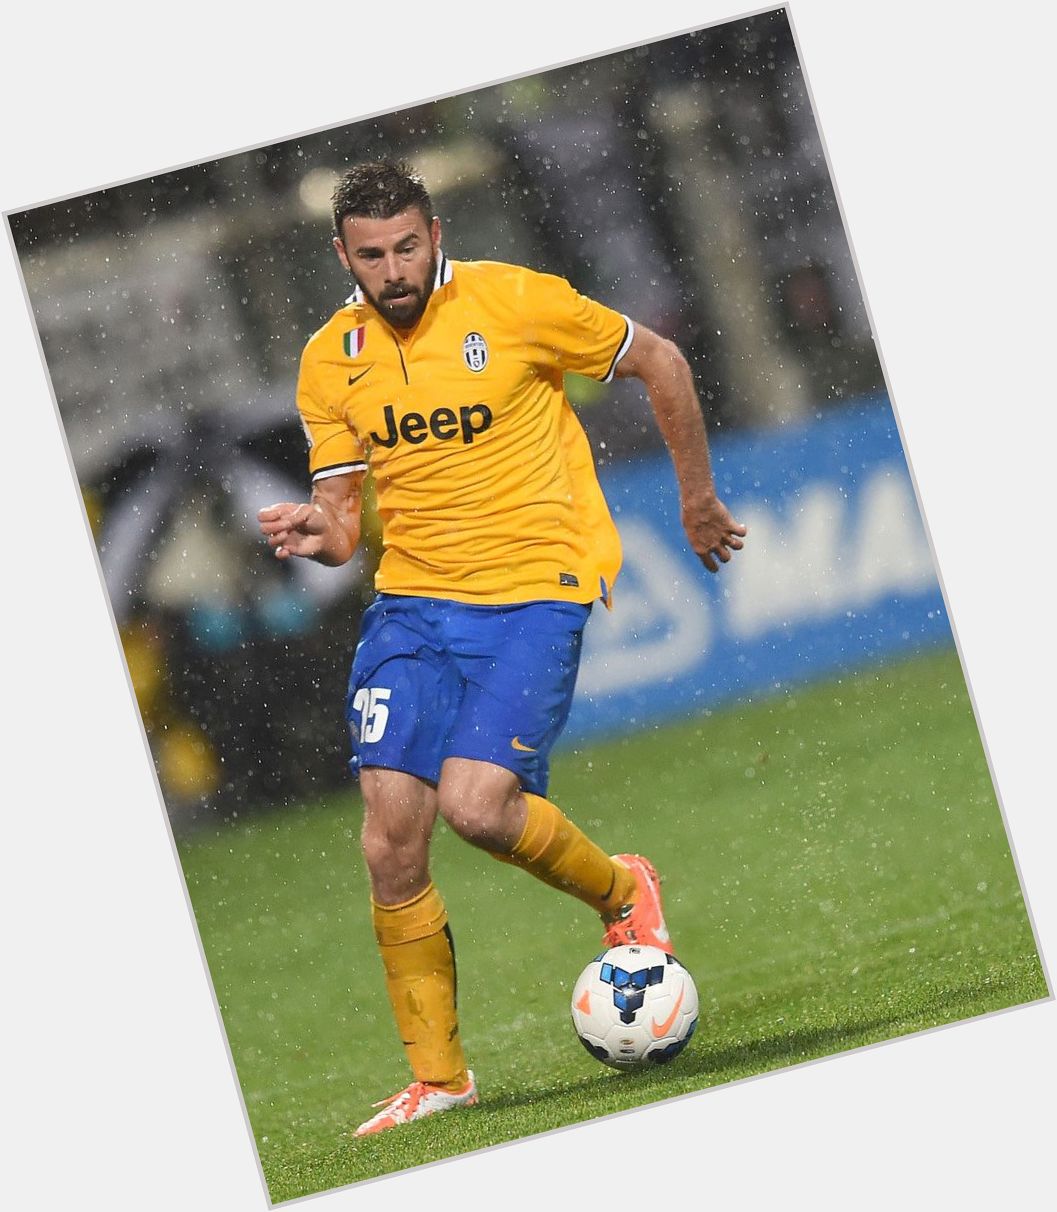 Andrea Barzagli light brown hair & hairstyles Athletic body, 